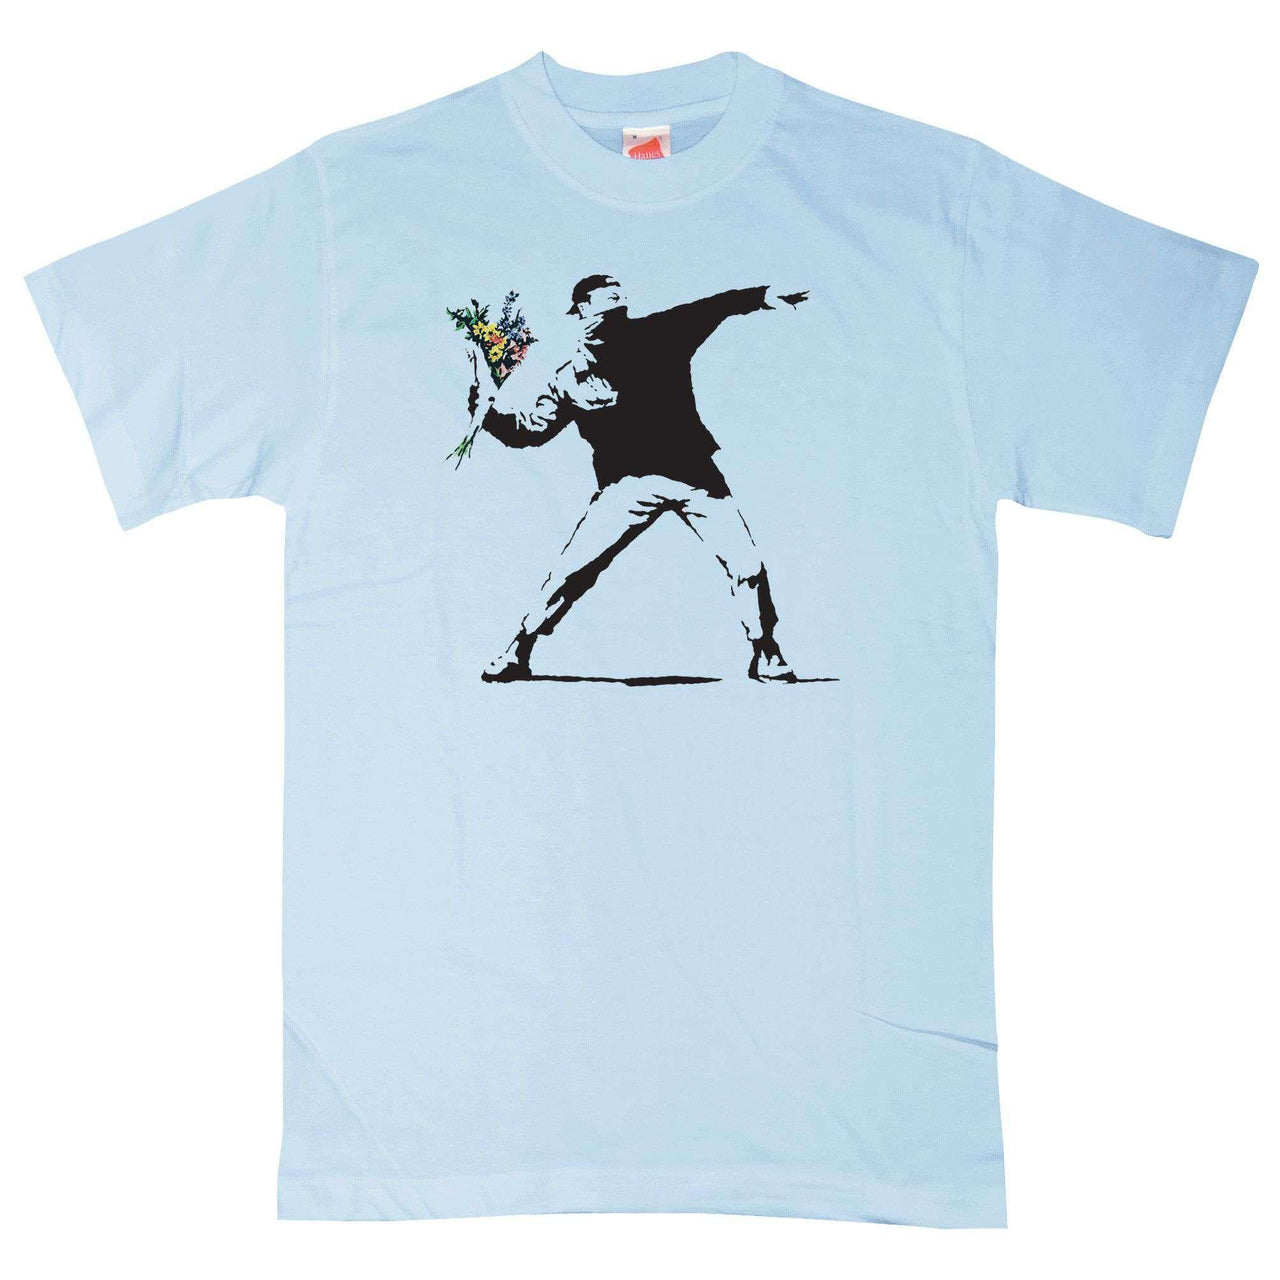 Banksy Throwing Flowers Mens Graphic T-Shirt 8Ball